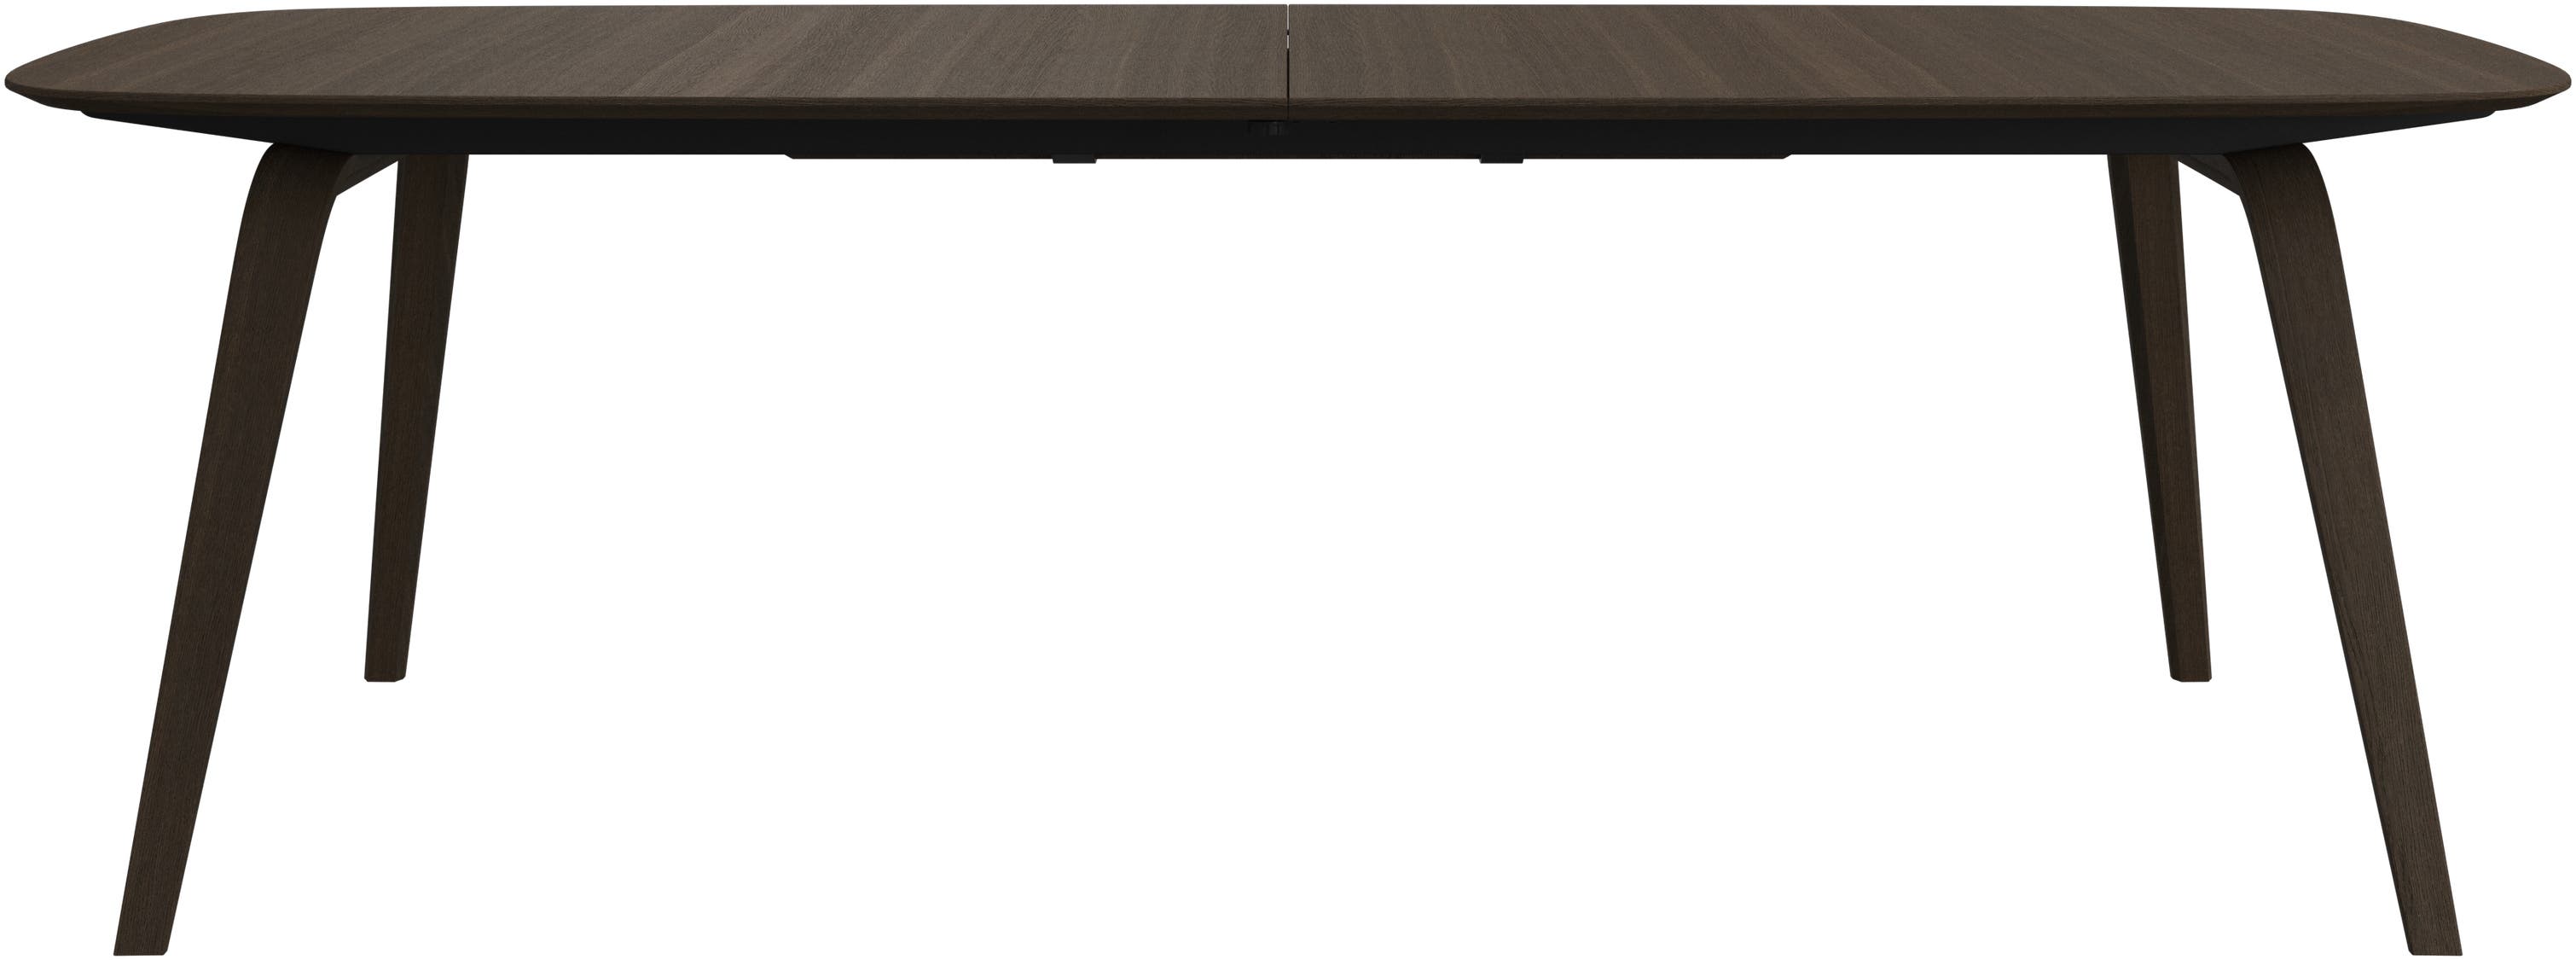 Hauge dining table